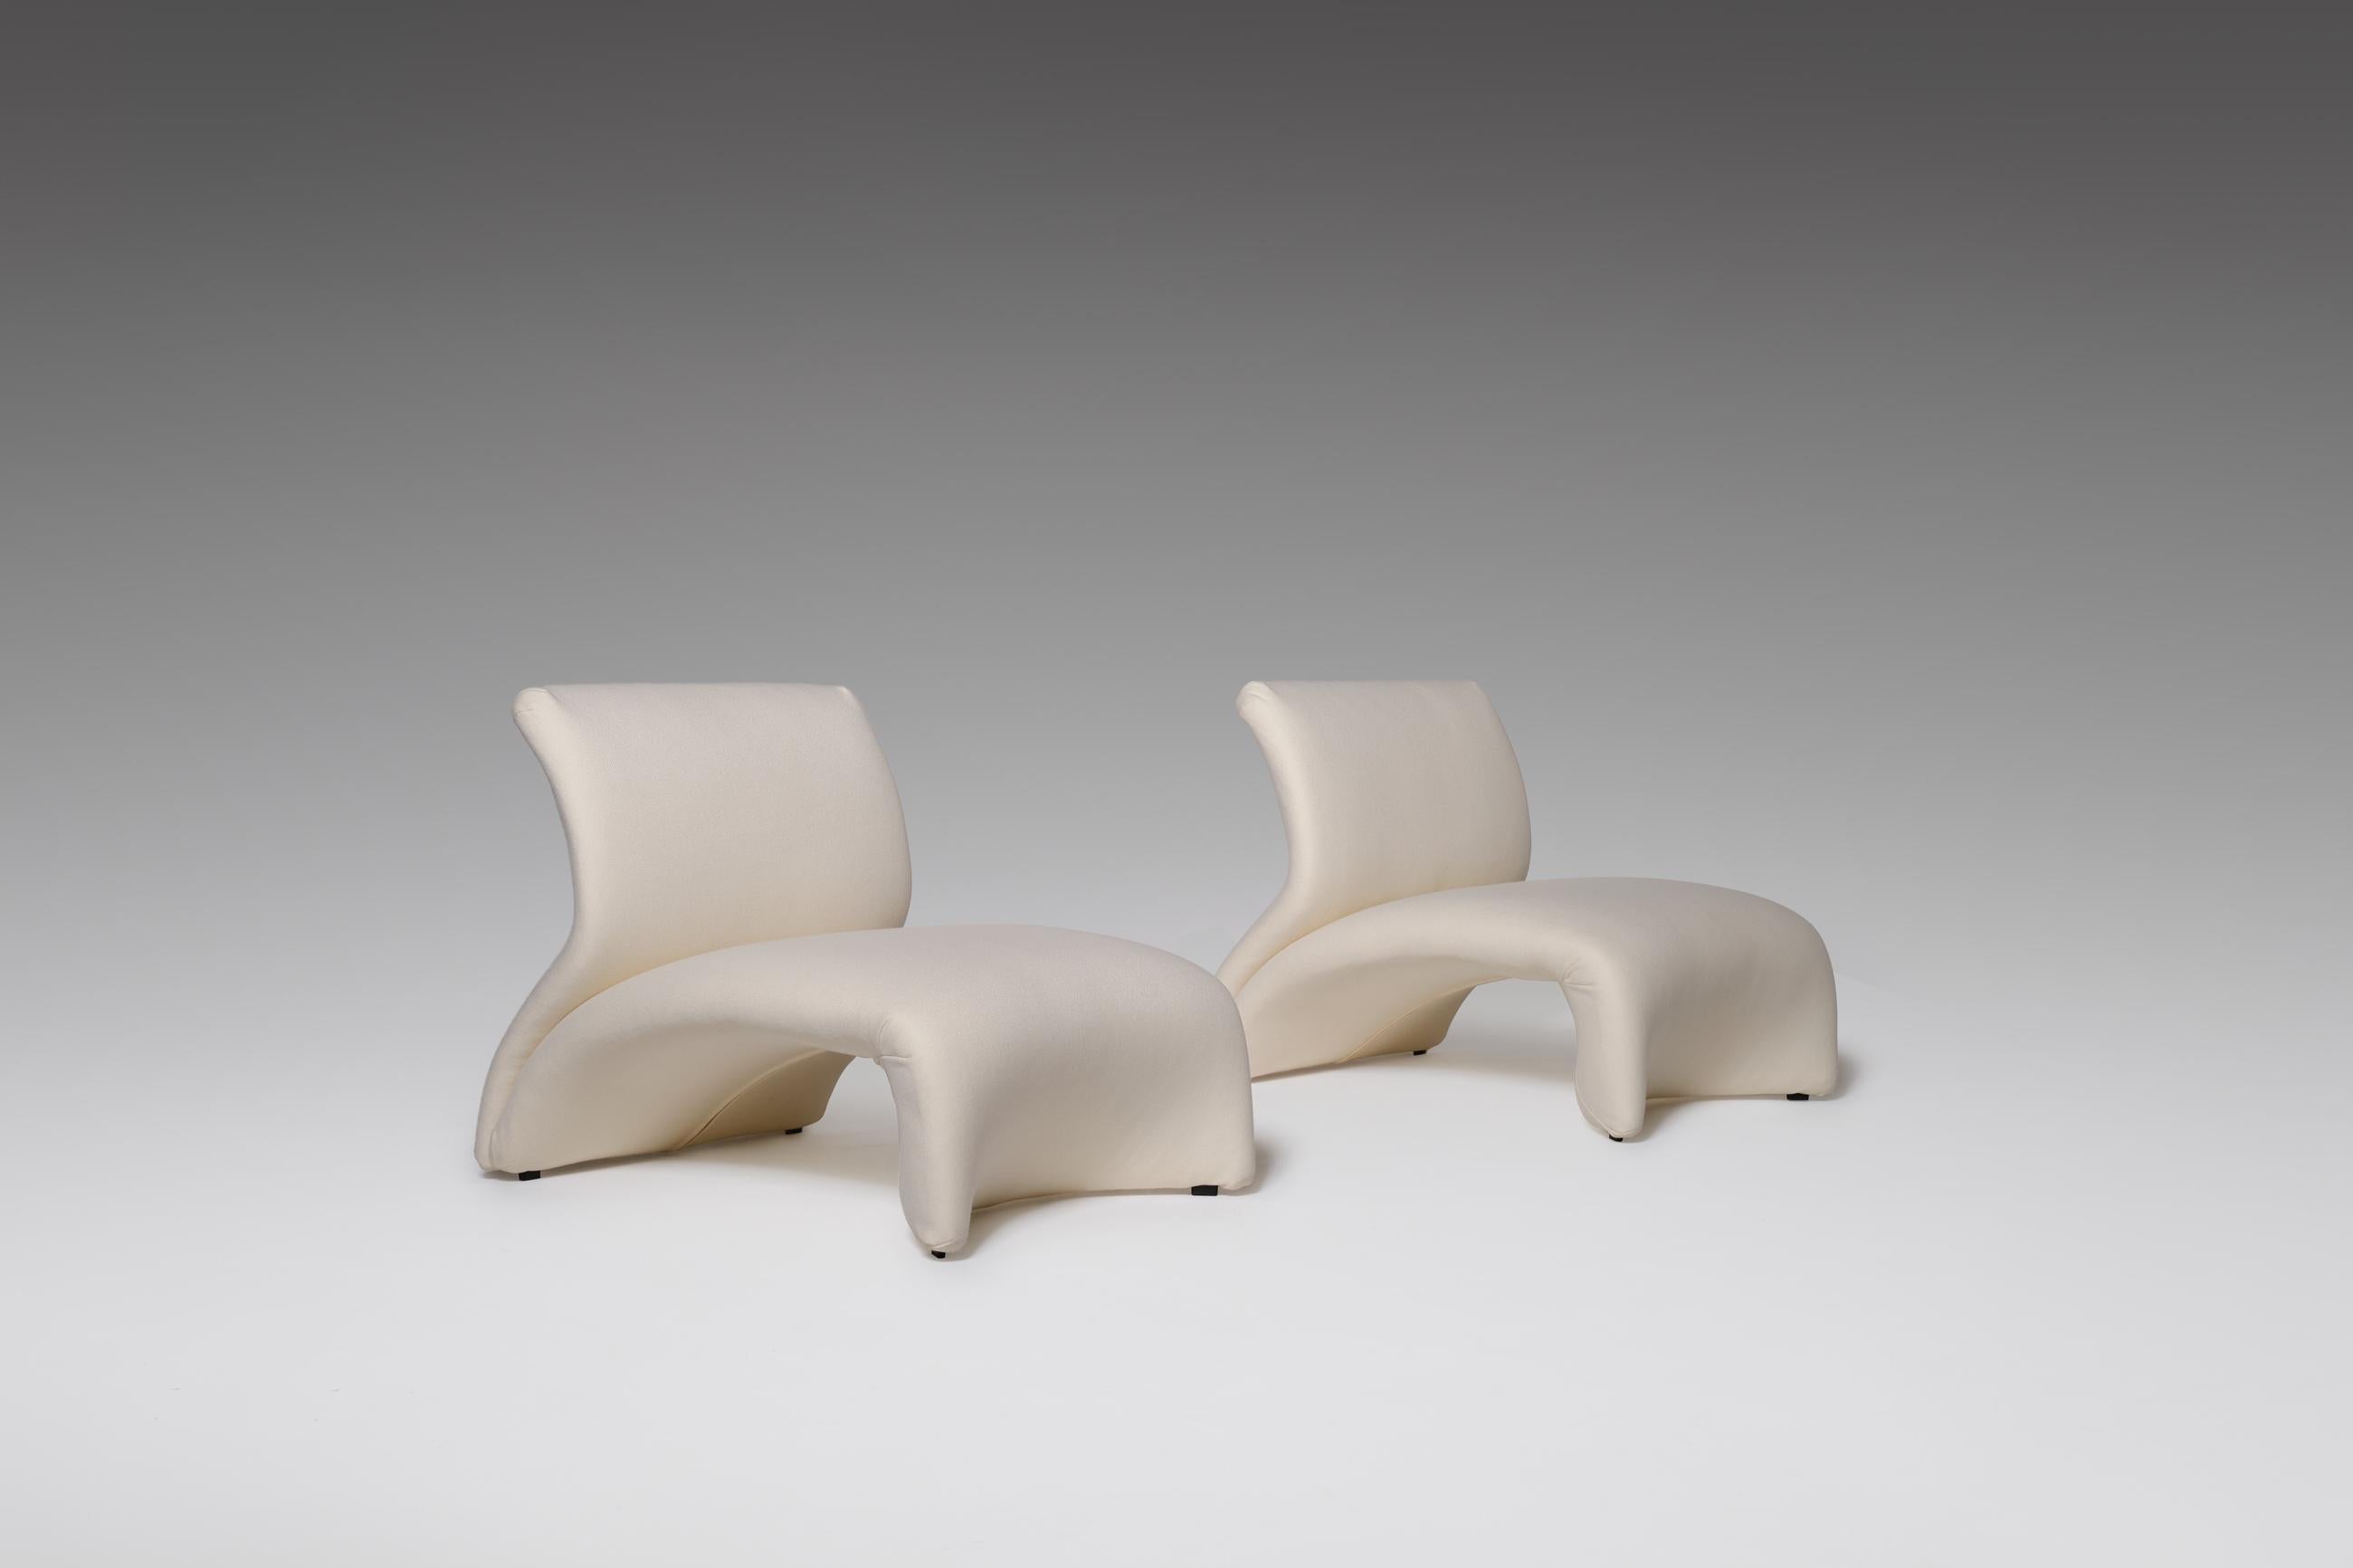 Rare pair of ‘Kaïdo’ lounge chairs by by Kwok Hoï Chan for Steiner, 1968. Fantastic sensual and soft design. Kwok Hoï Chan Kwok Hoï Chan was born in Hong Kong and emigrated to England and later to France but always stayed loyal to his Chinese